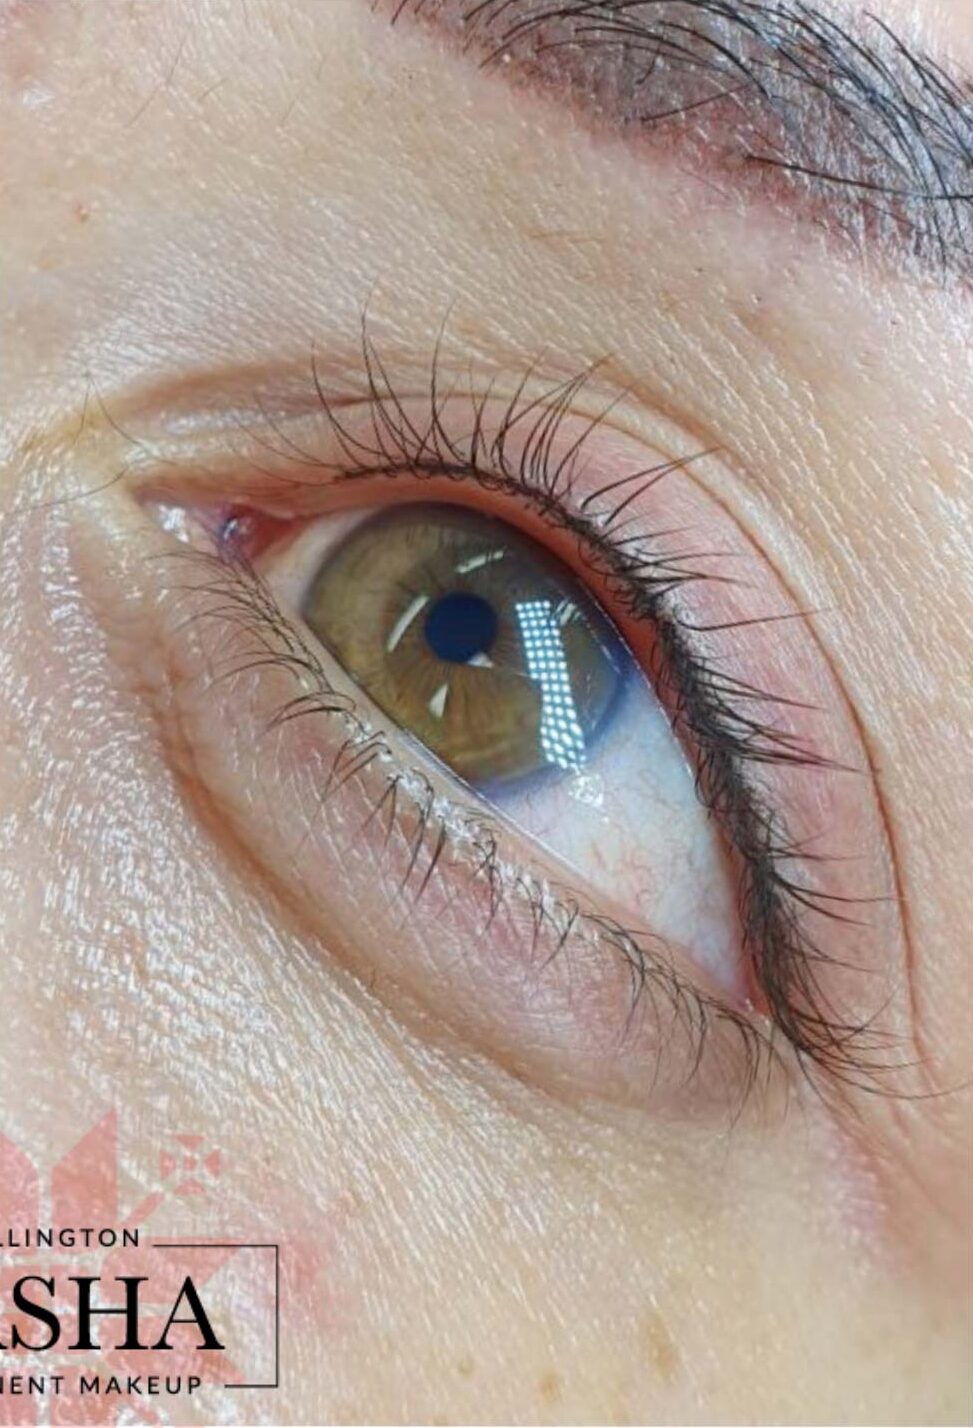 Lash Line Tattoo. Cosmetic and Mediical Tattoo by Dasha. Permanent makeup and reconstructive tattoo, scalp micro-pigmentation in Christchurch, New Zealand